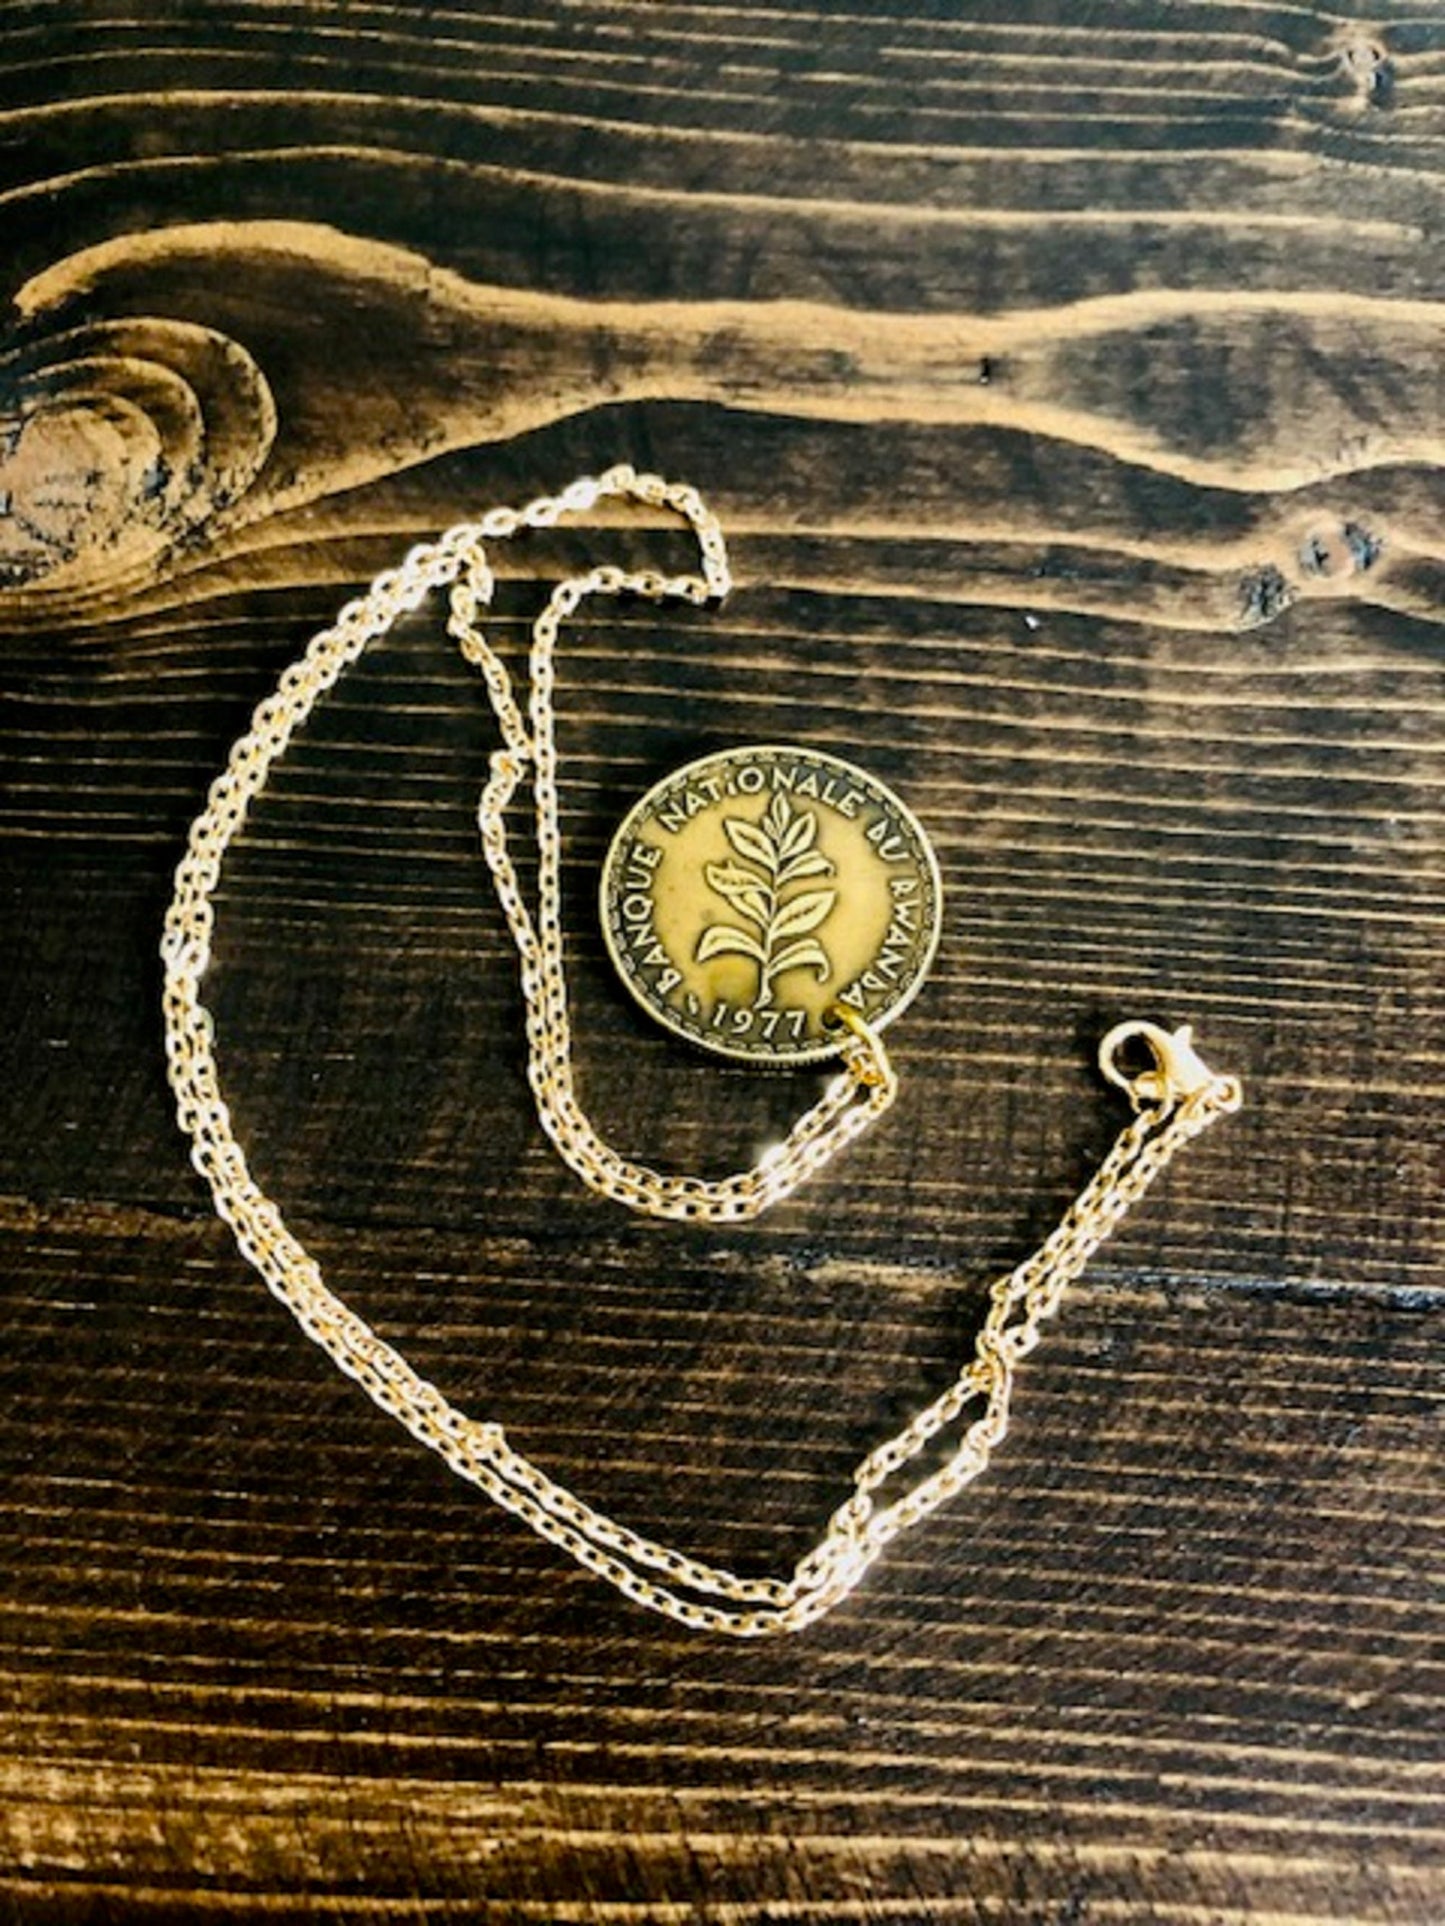 Rwanda Africa Coin Necklace African 50 Cenquante Francs Pendant Personal Jewelry Gift Friend Charm For Him Her World Coin Collector